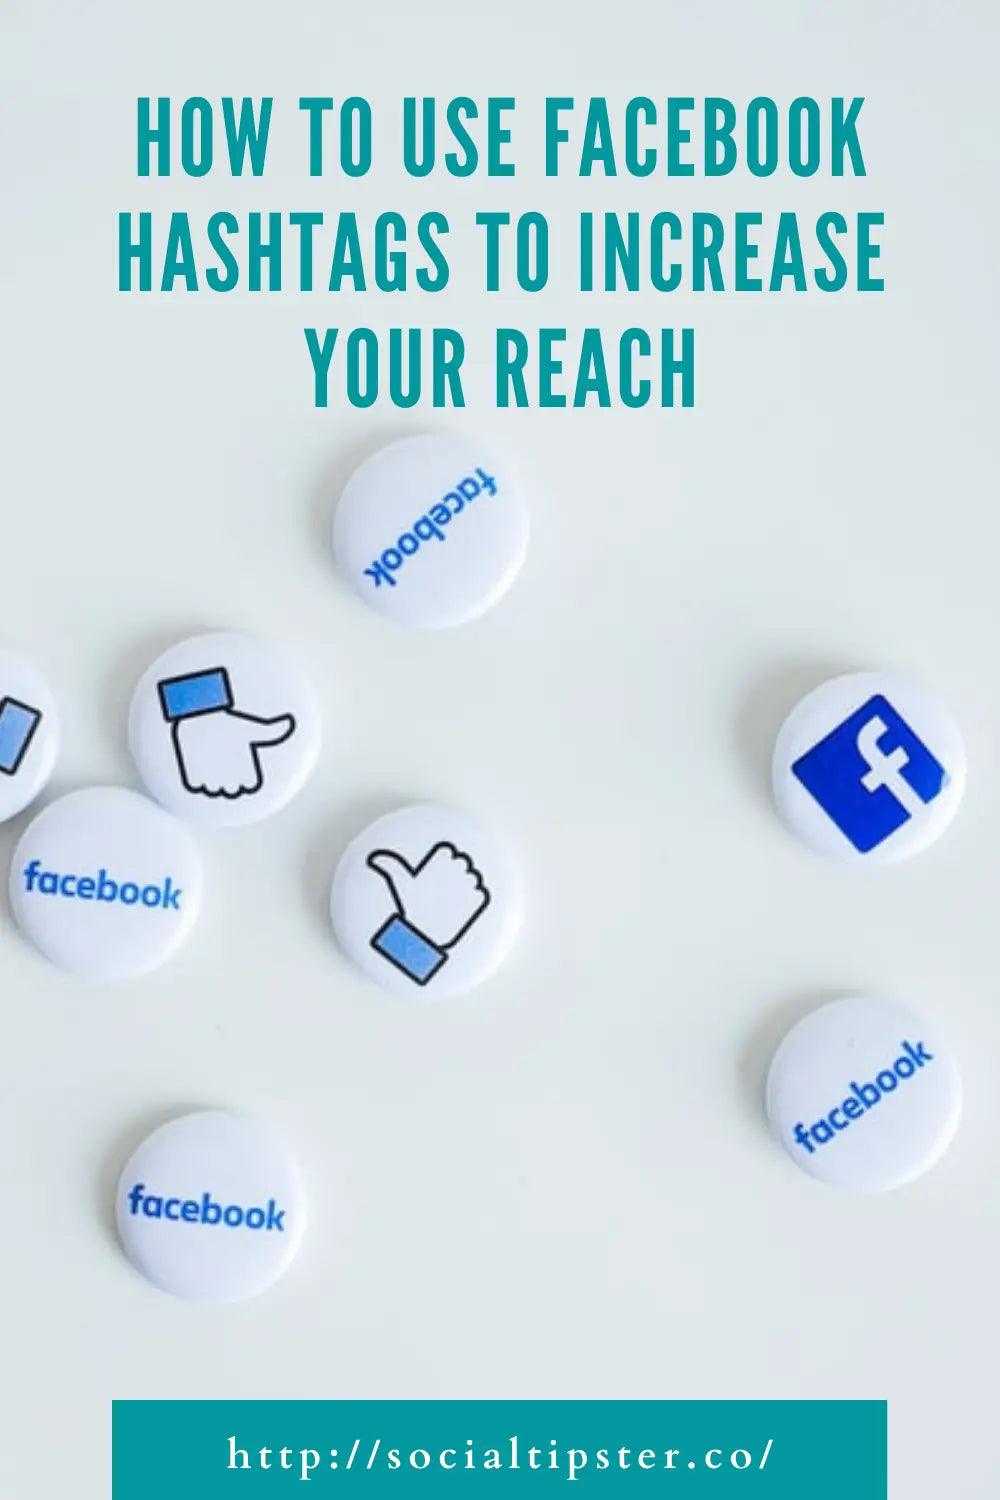 Use Facebook Hashtags to Increase Your Reach;How to Use Facebook Hashtags to Increase Your Reach